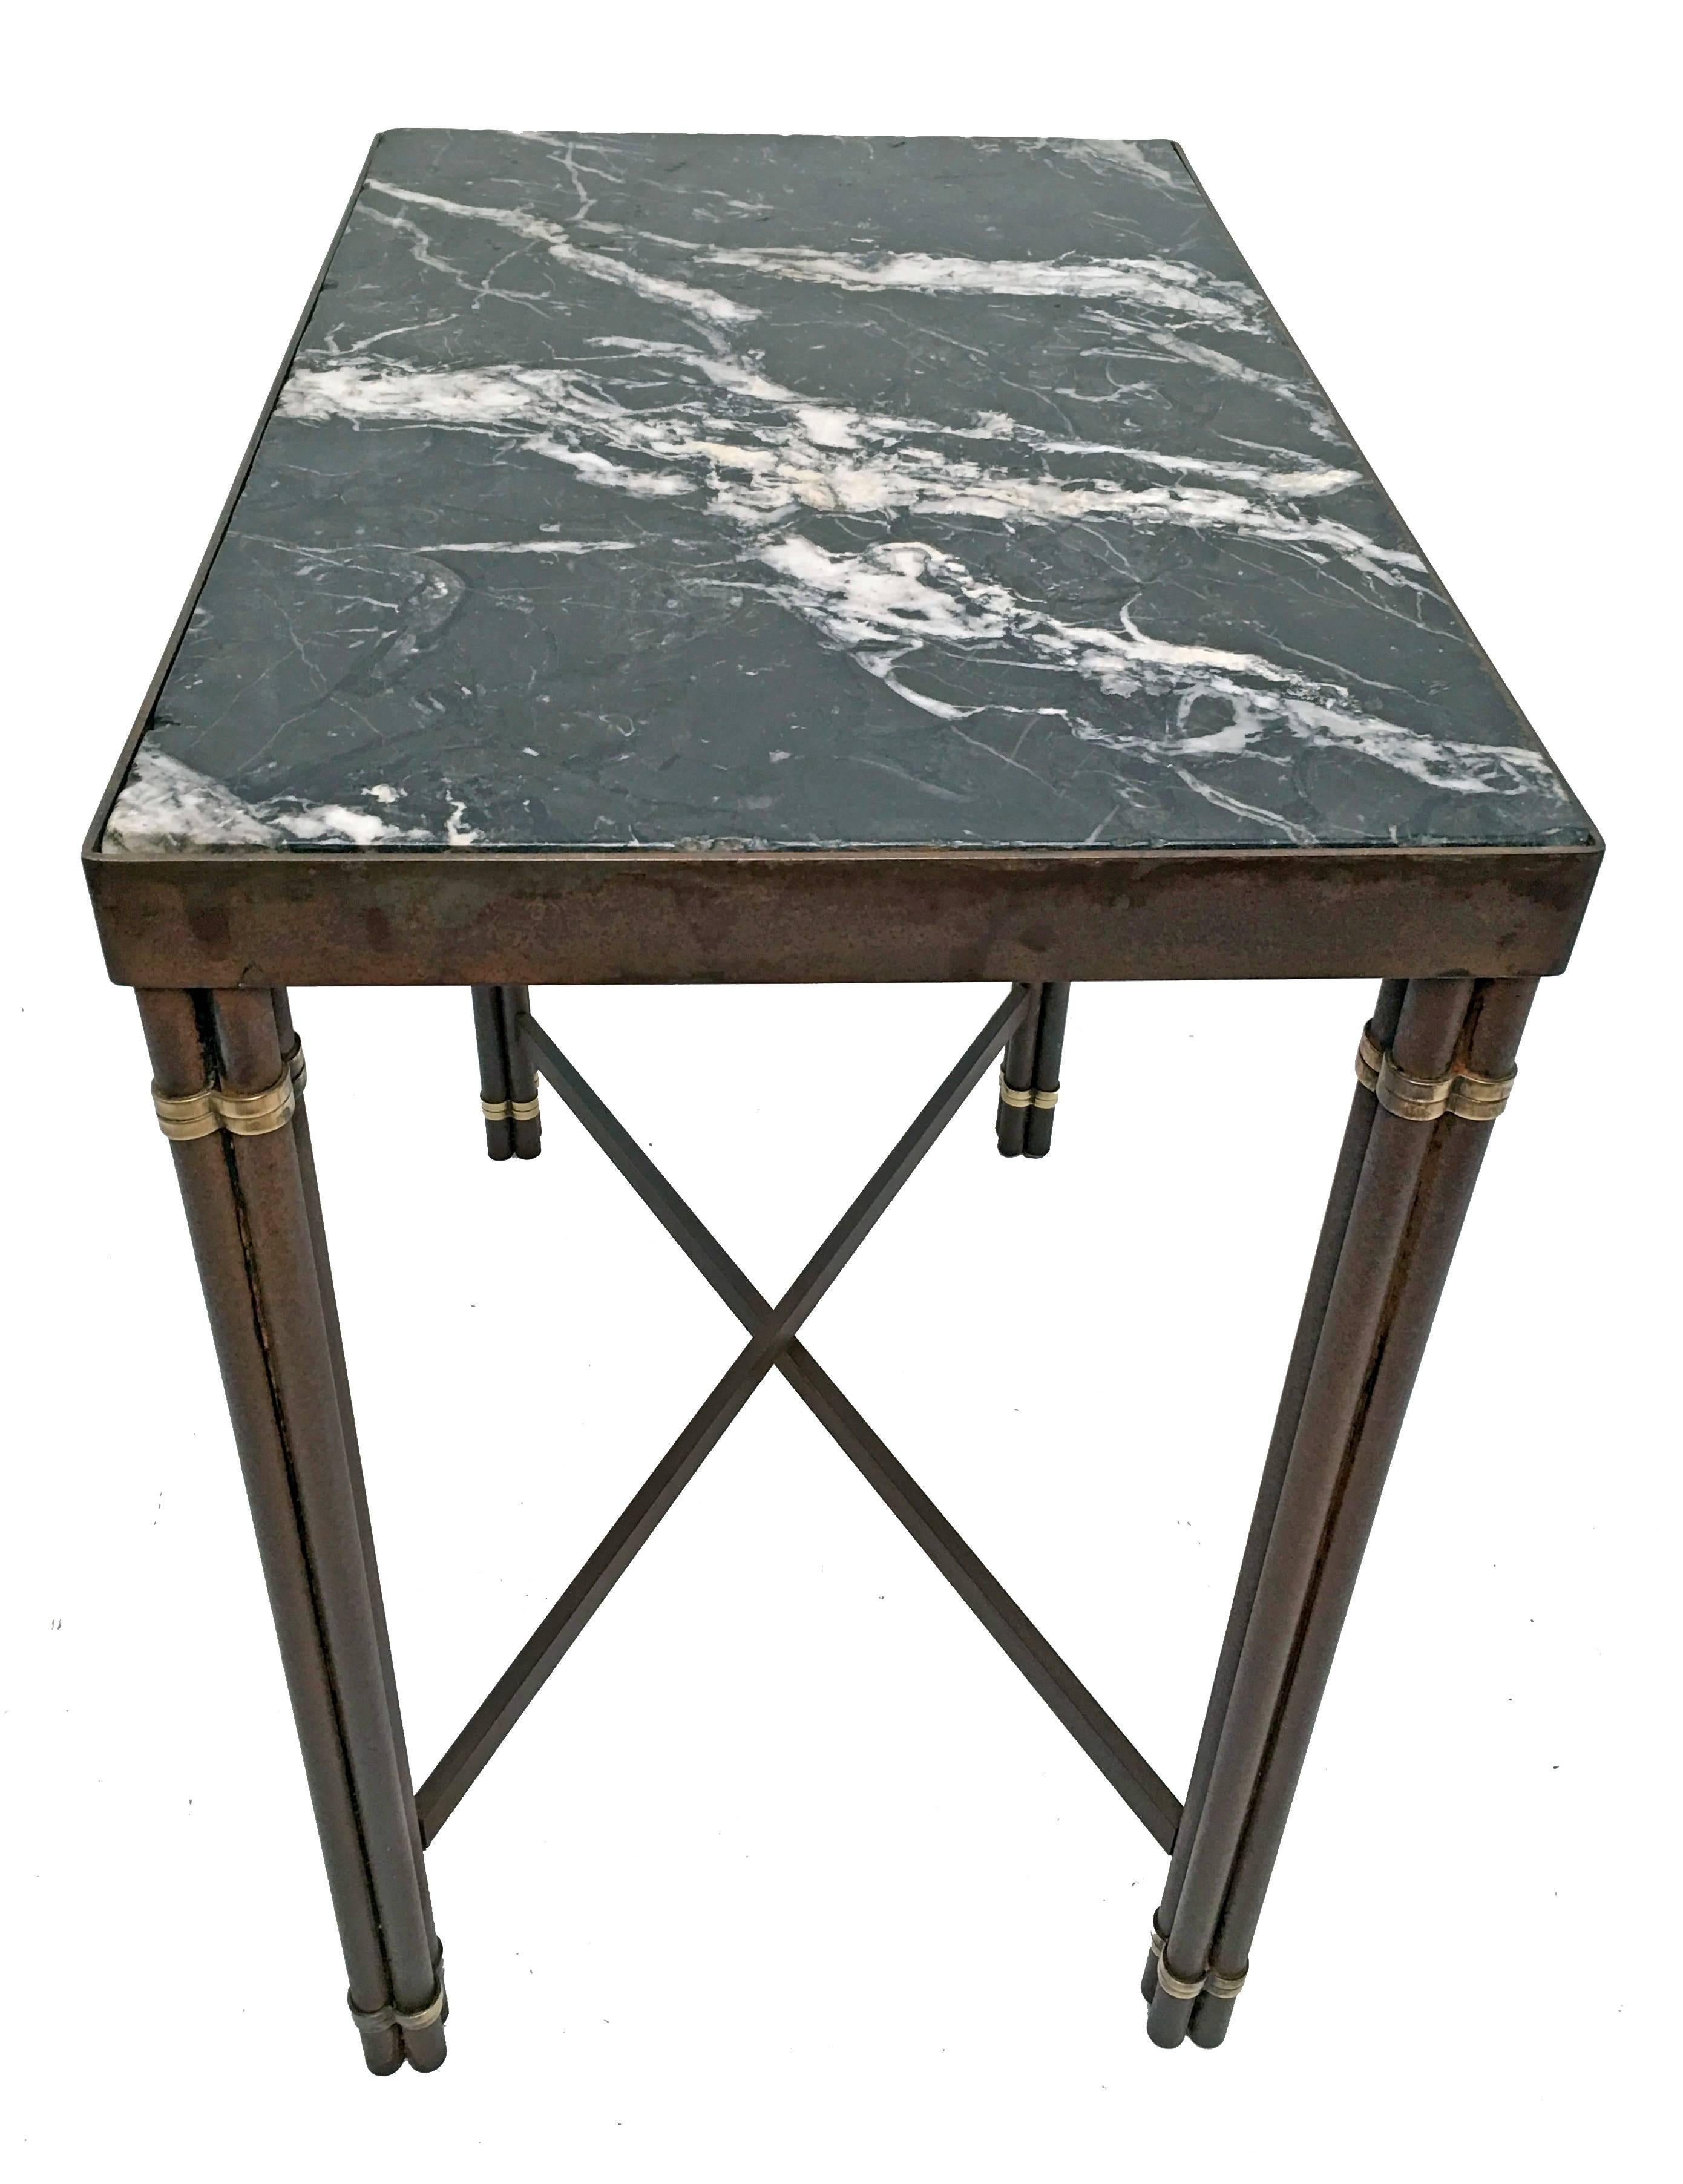 American Modern Iron Frame with Nero Marquina Black Marble Top Garden Table